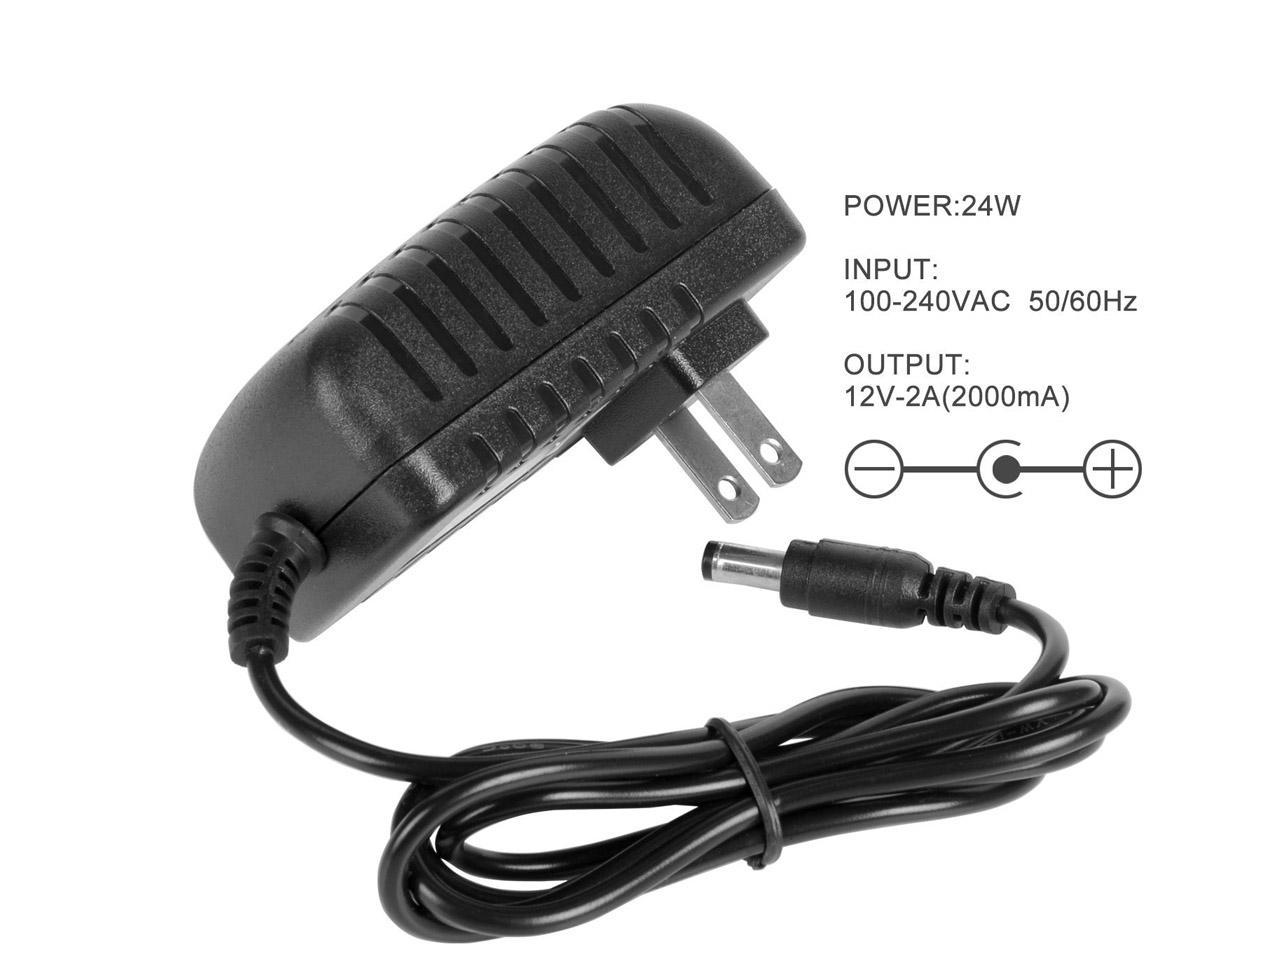 2.1x5.5mm CCTV Security Camera Power Supply Adapter 12V DC 2A Charger 2000mA 